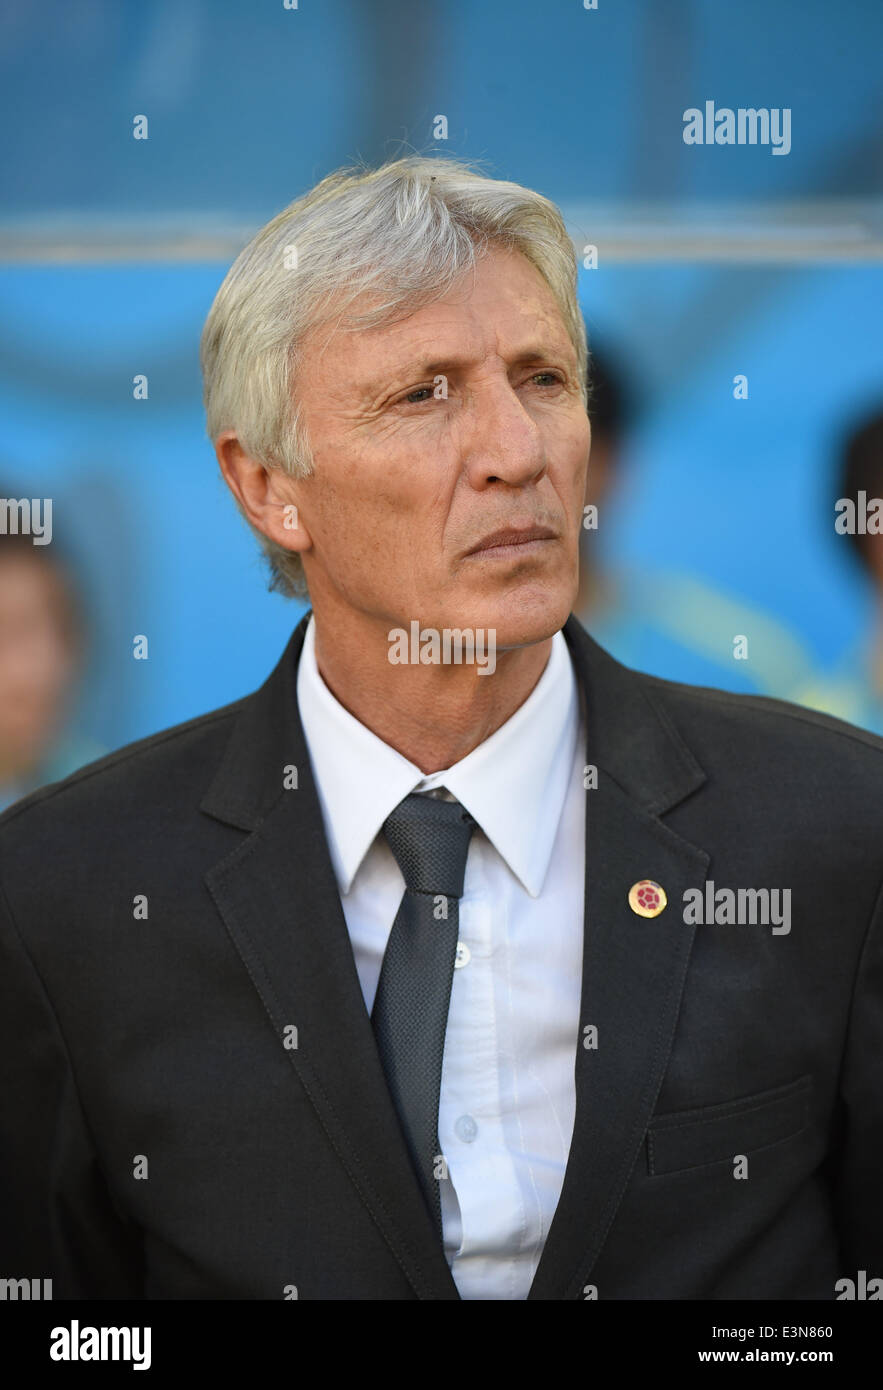 Cuiaba, Brazil. 24th June, 2014. Colombia's coach Jose Pekerman reacts before a Group C match between Japan and Colombia of 2014 FIFA World Cup at the Arena Pantanal Stadium in Cuiaba, Brazil, June 24, 2014. © Liu Dawei/Xinhua/Alamy Live News Stock Photo